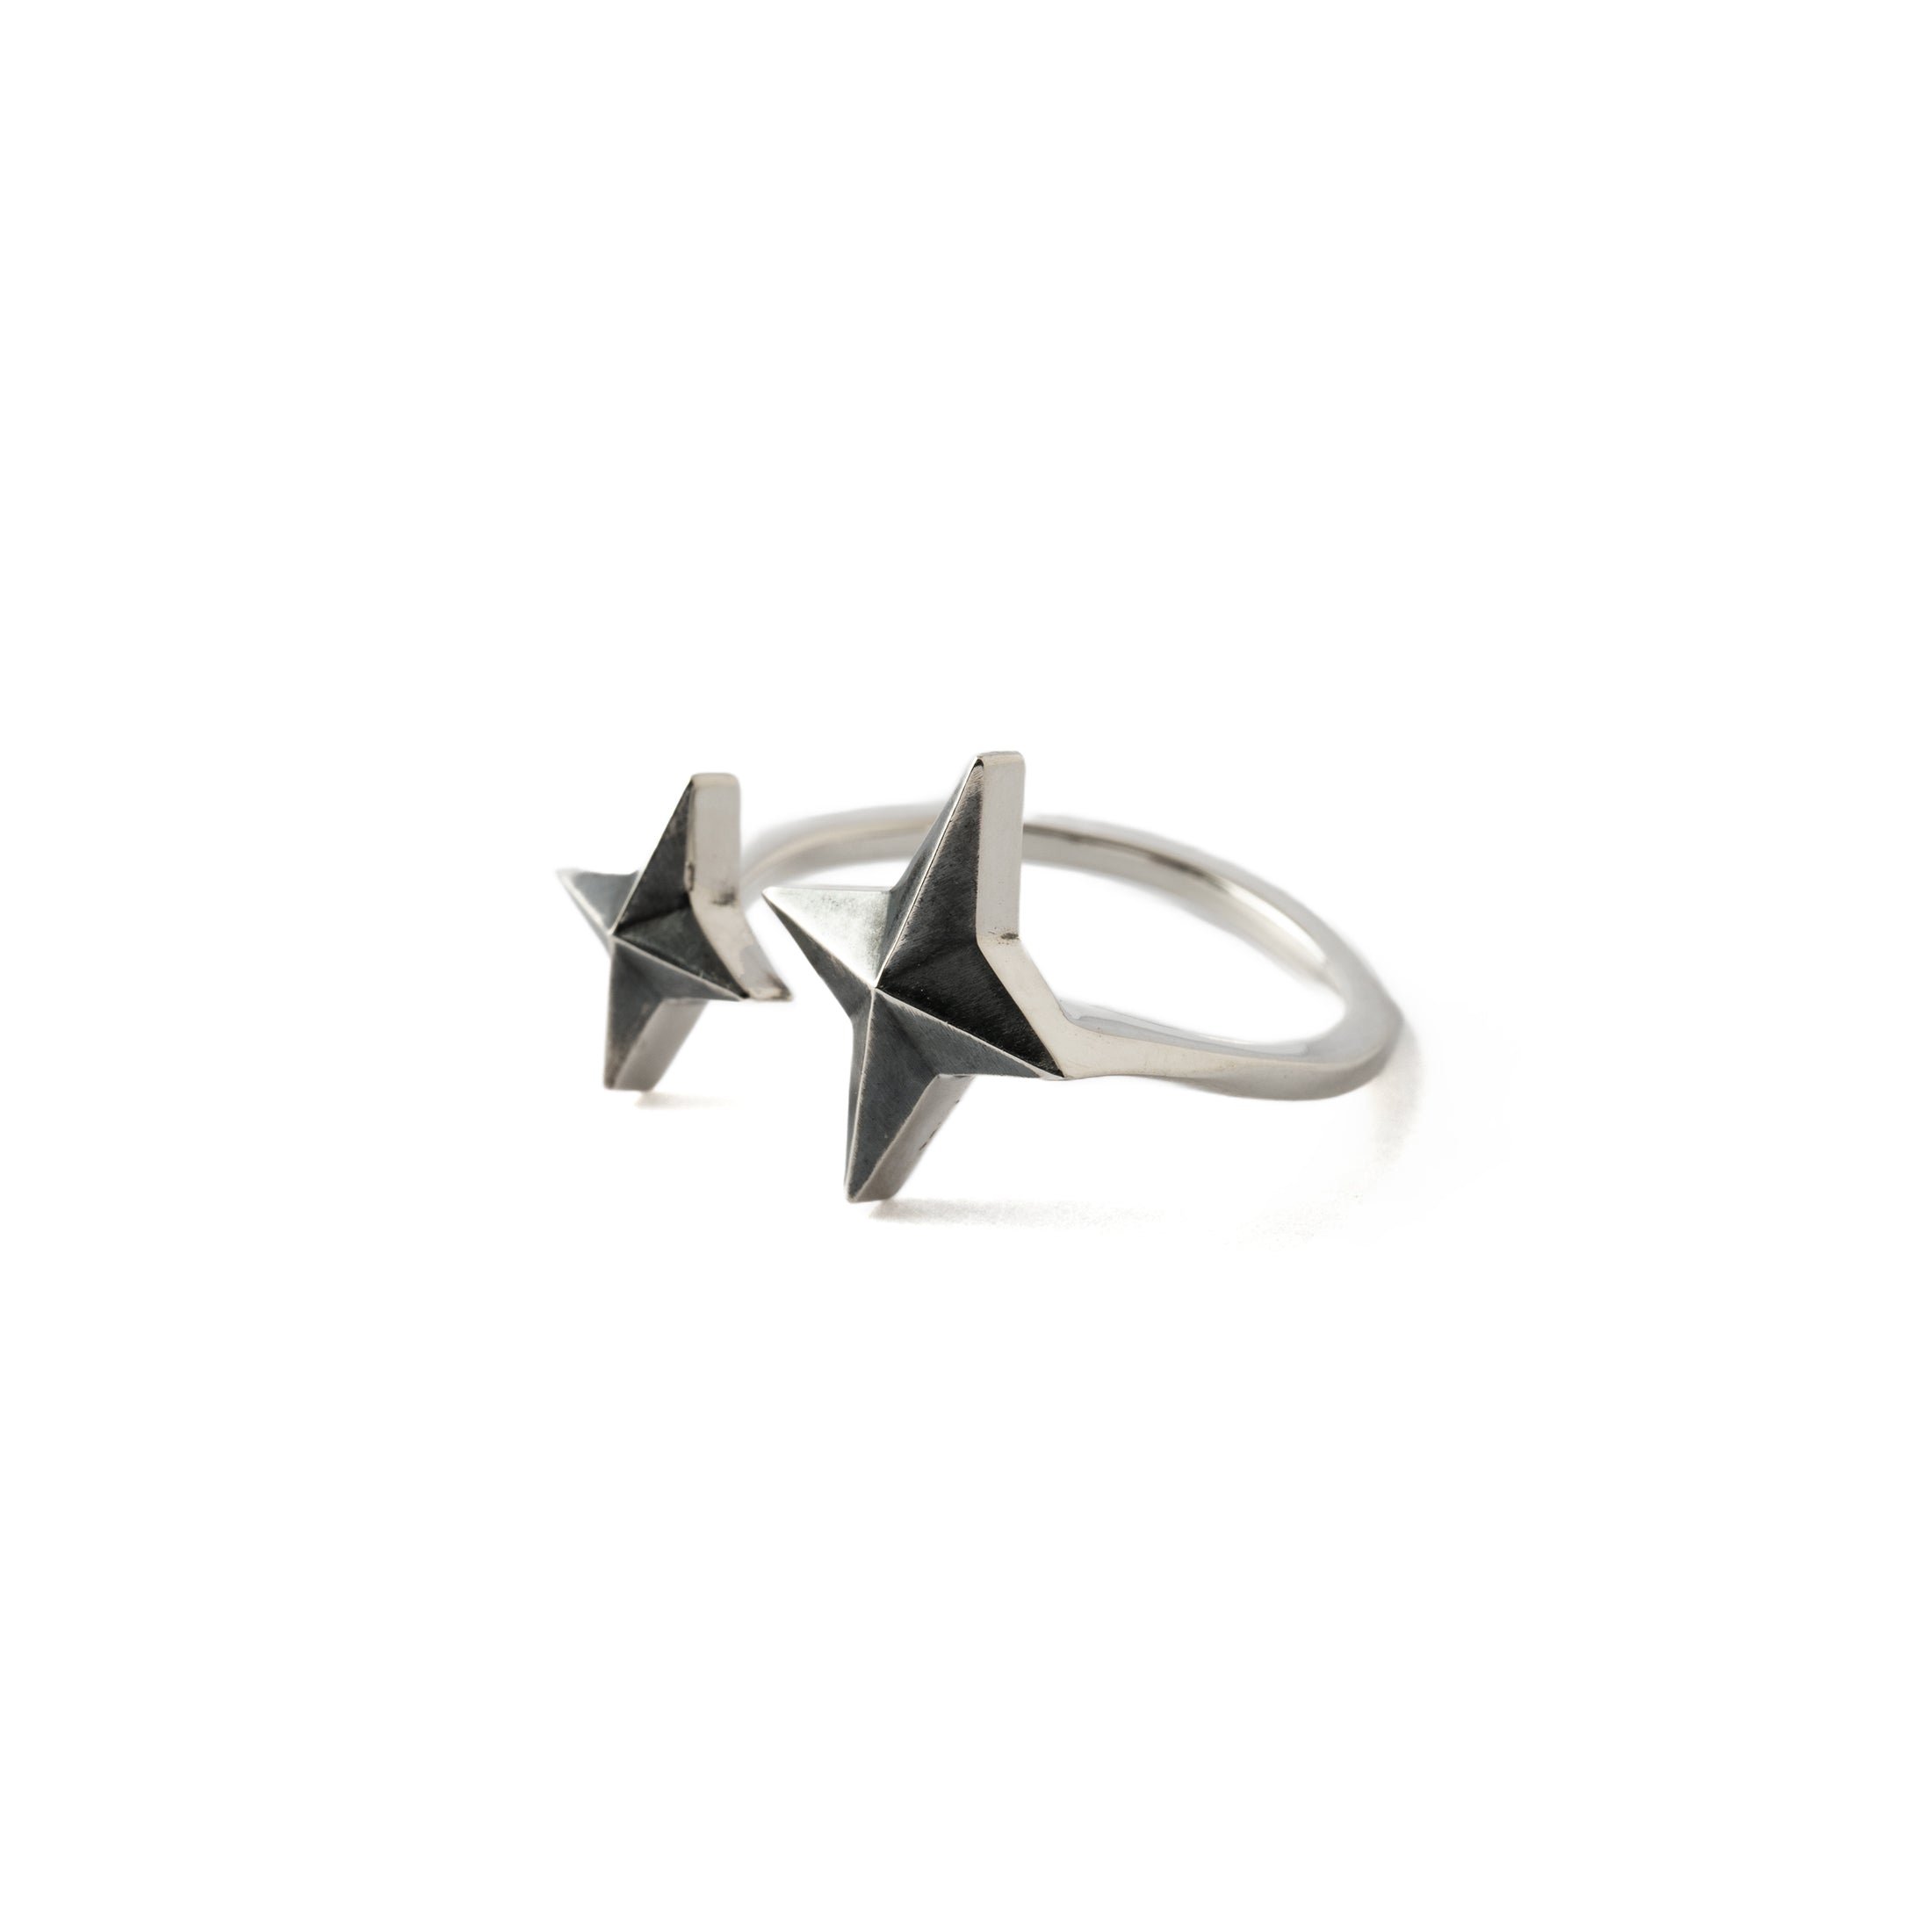 North Star Silver Ring right side view